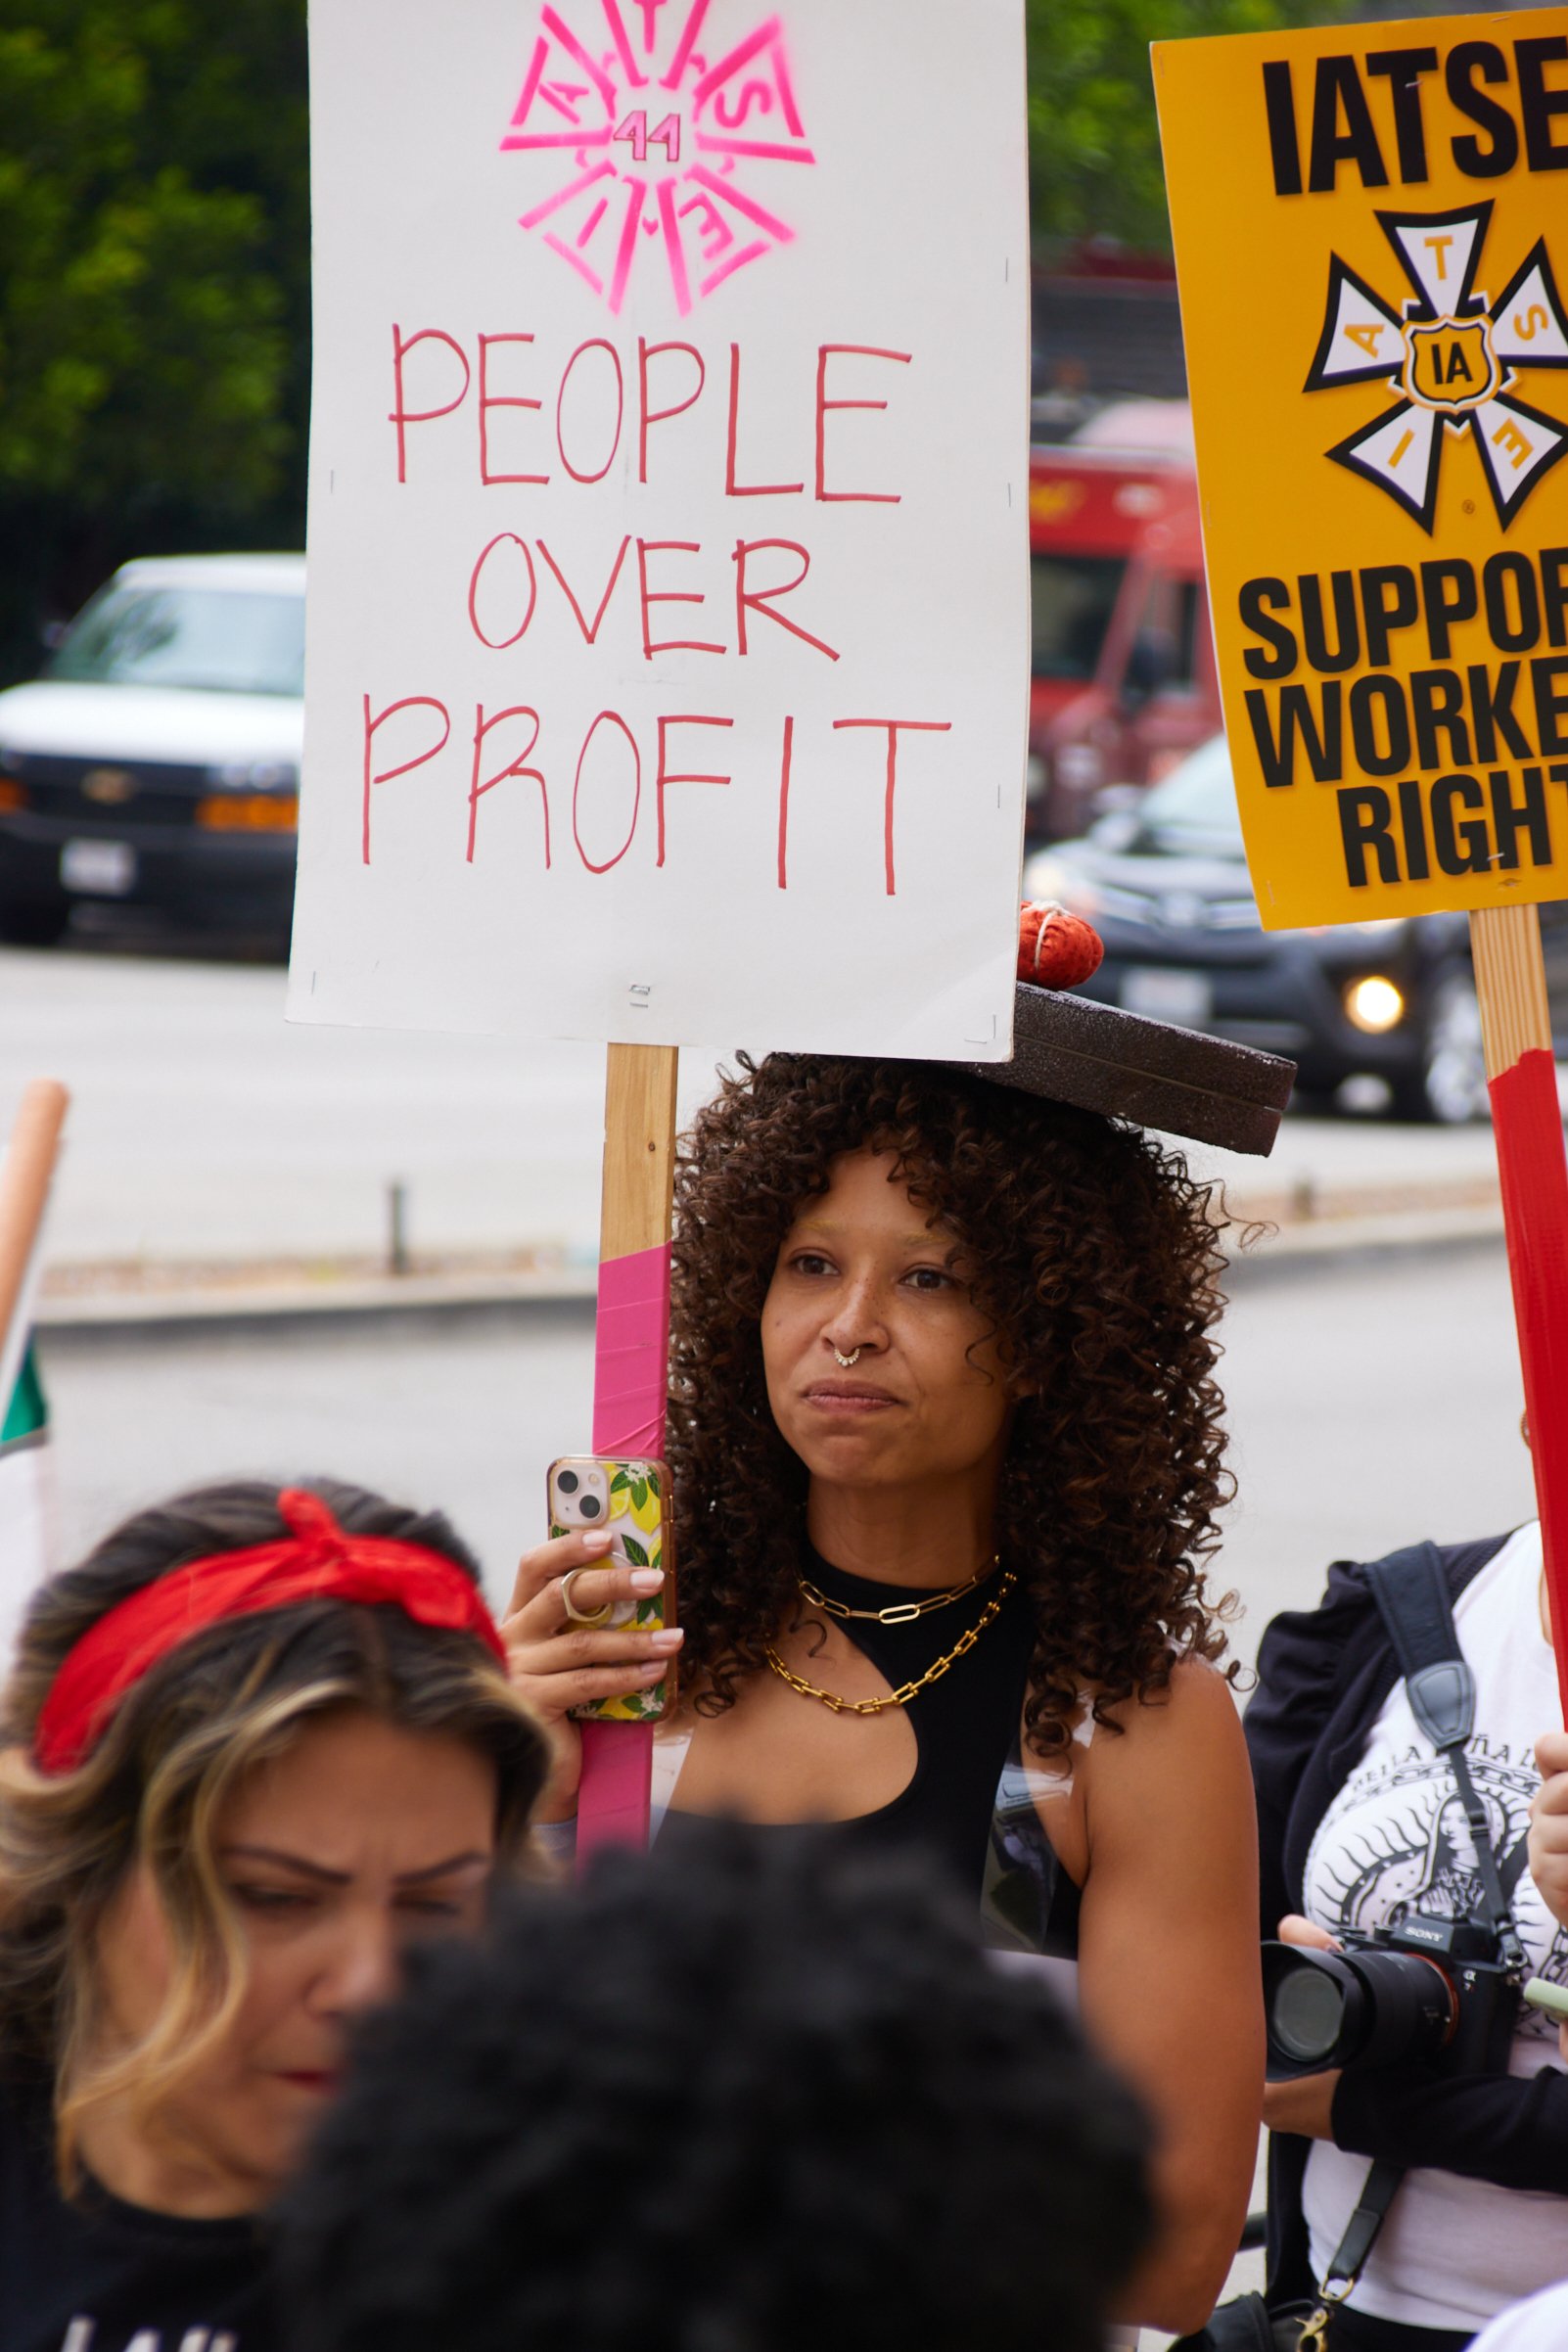  An IATSE member holding up a sign with "PEOPLE OVER PROFIT" written on and IATSE 44 logo marches in solidarity alongside SAG-AFTRA members during the SAG-AFTRA strike in front of Warner Bros. Studio Gate 3, Burbank, Calif., on Sept 29, 2023. (Dannie